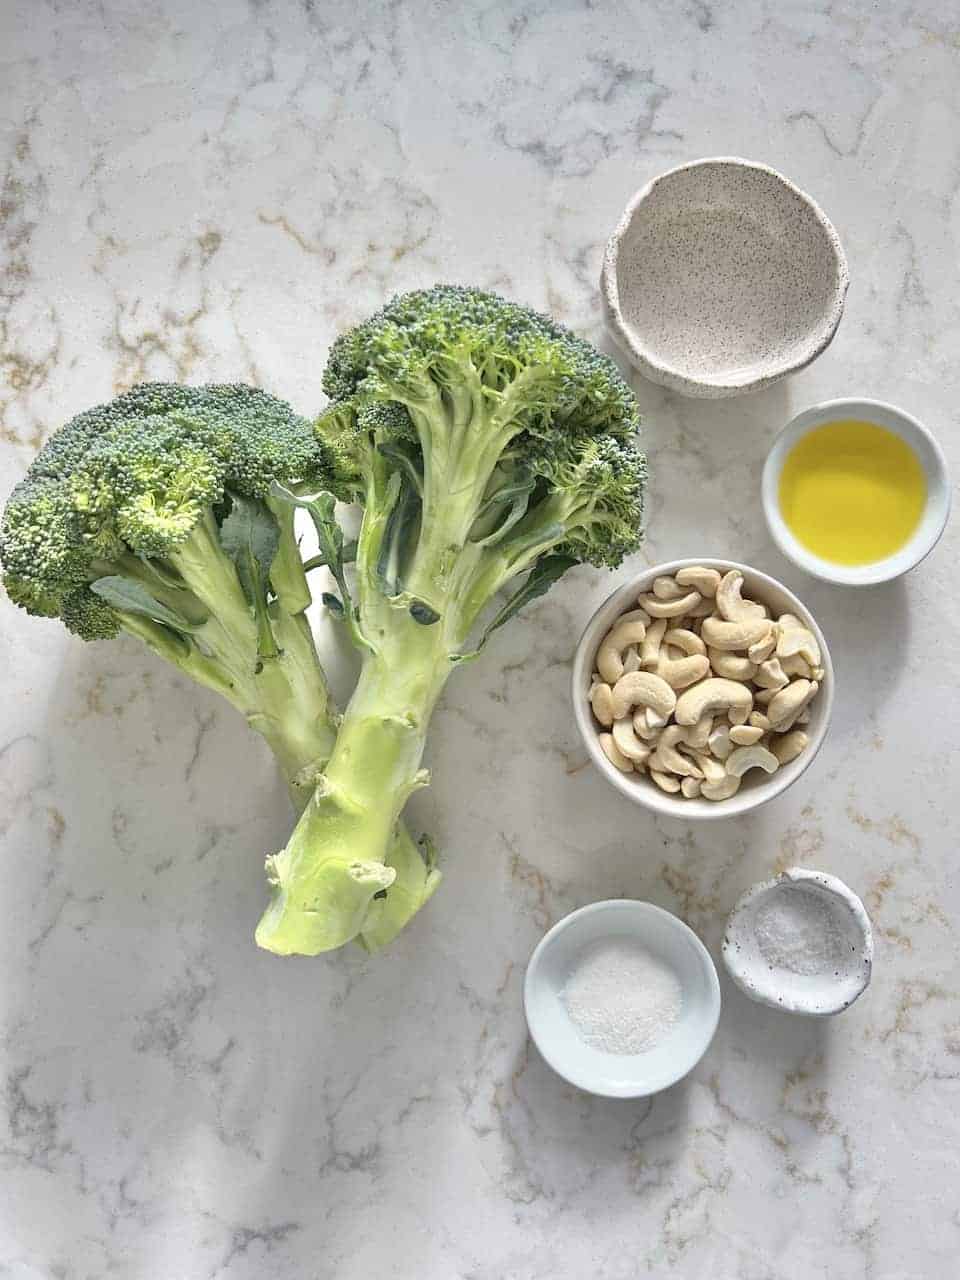 ingredients for Roasted Curried Broccoli measured out against a white surface